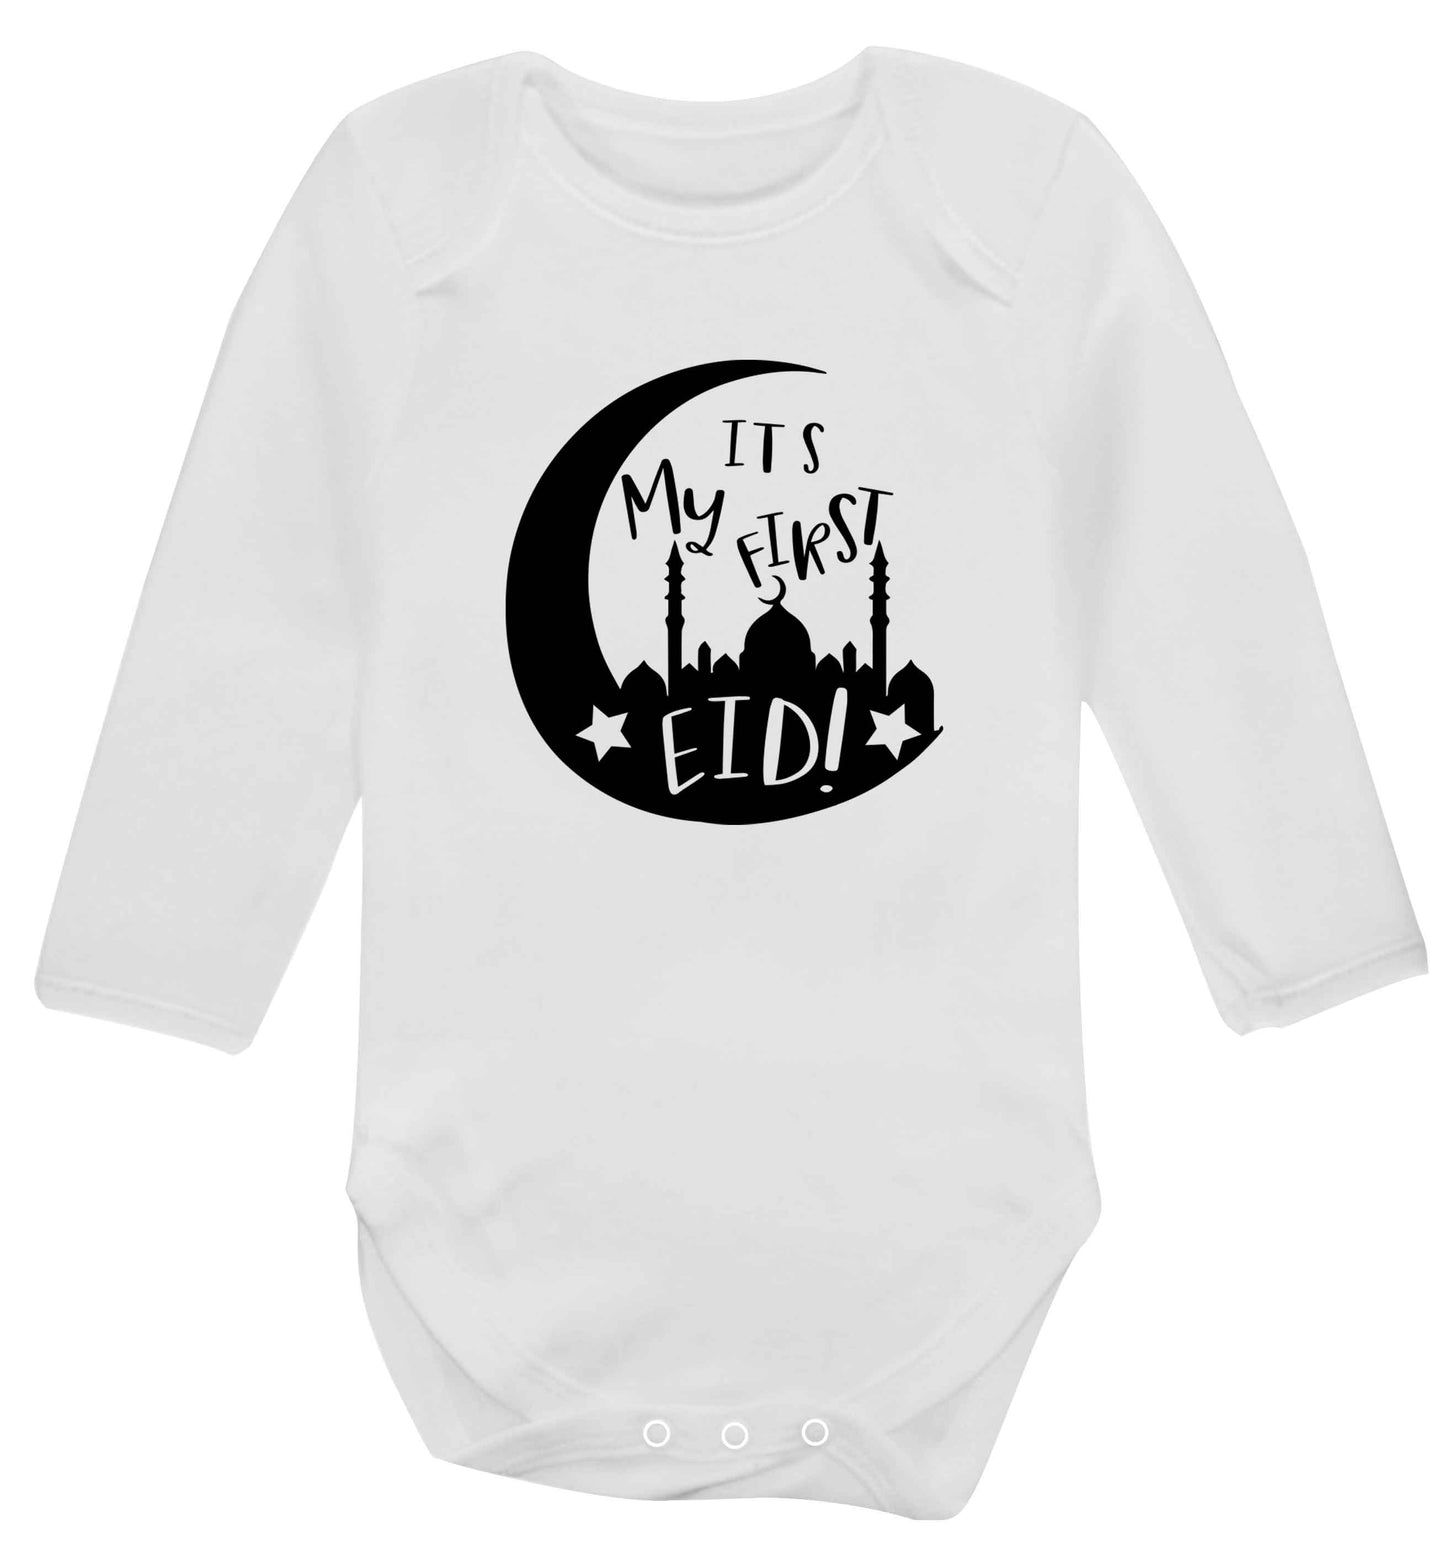 It's my first Eid moon baby vest long sleeved white 6-12 months